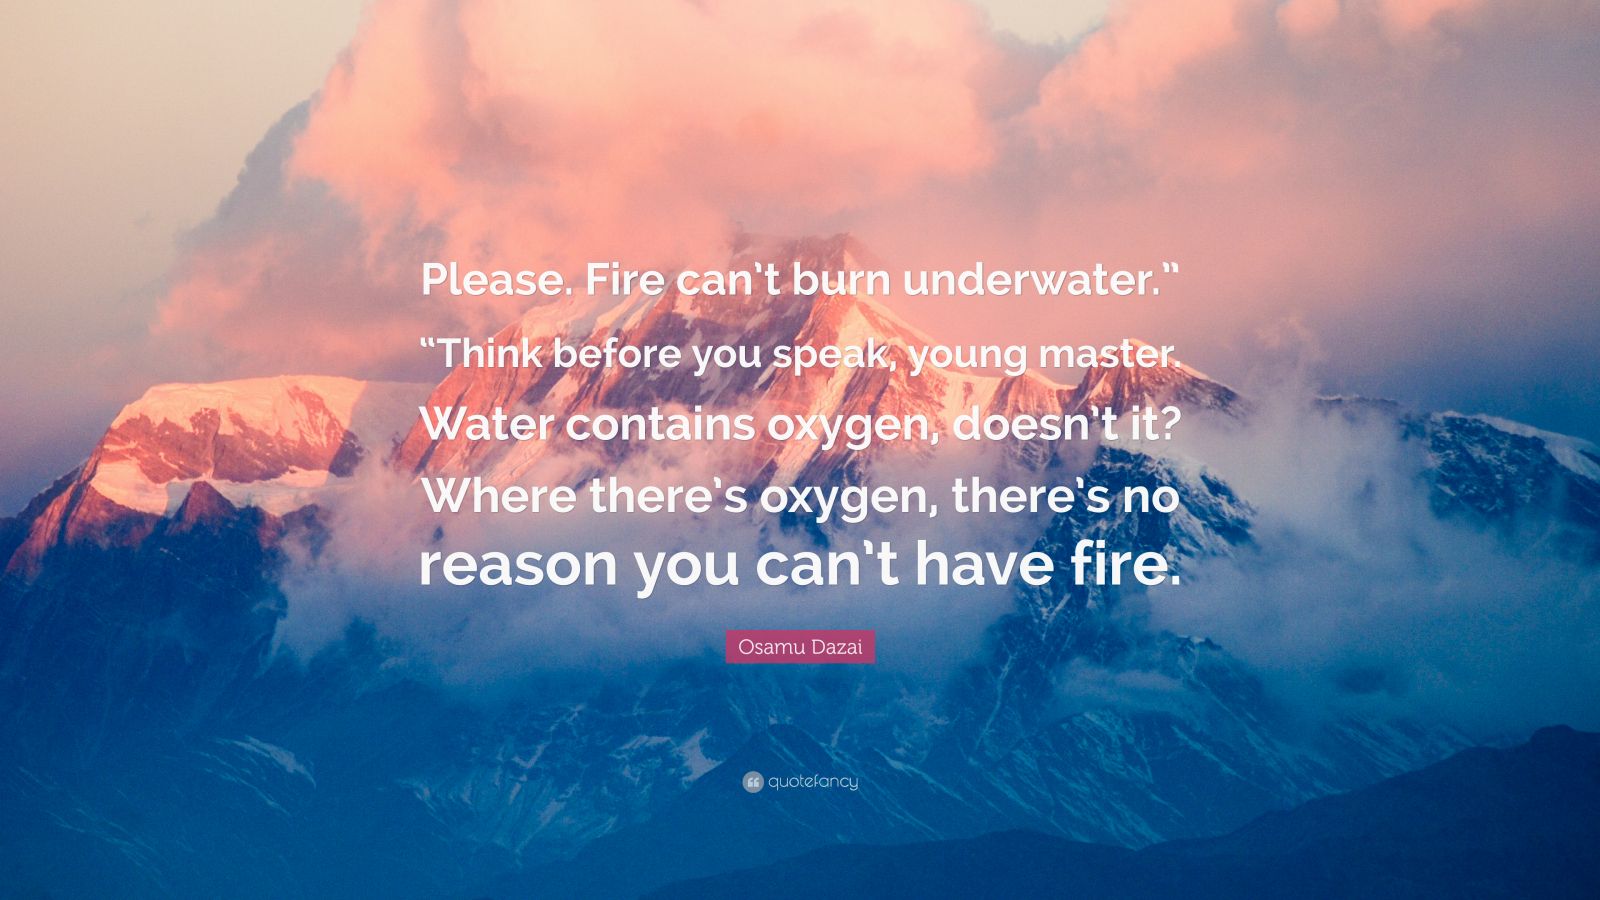 Osamu Dazai Quote: “Please. Fire can't burn underwater.” “Think before you  speak, young master. Water contains oxygen, doesn't it? Where the”